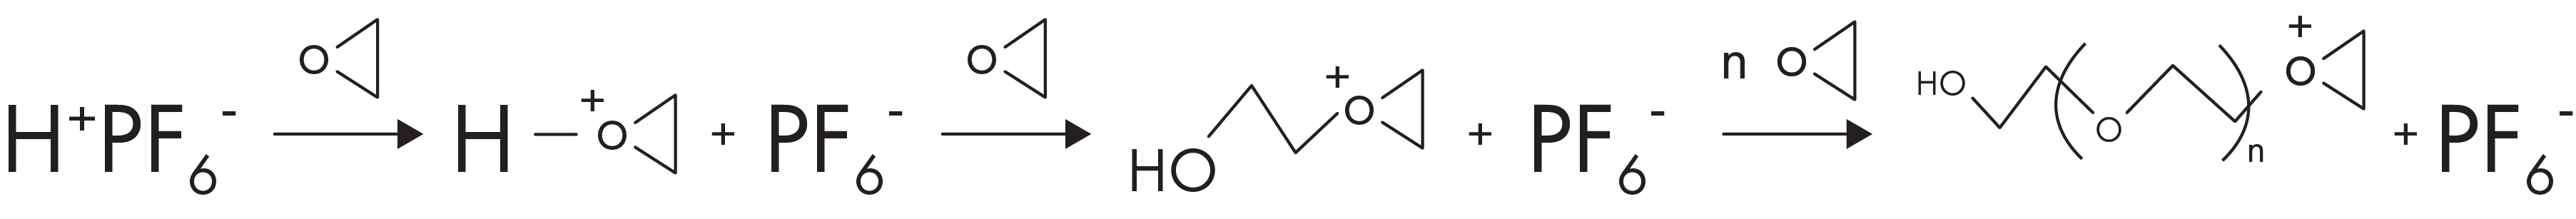 chemical-equation-2.png